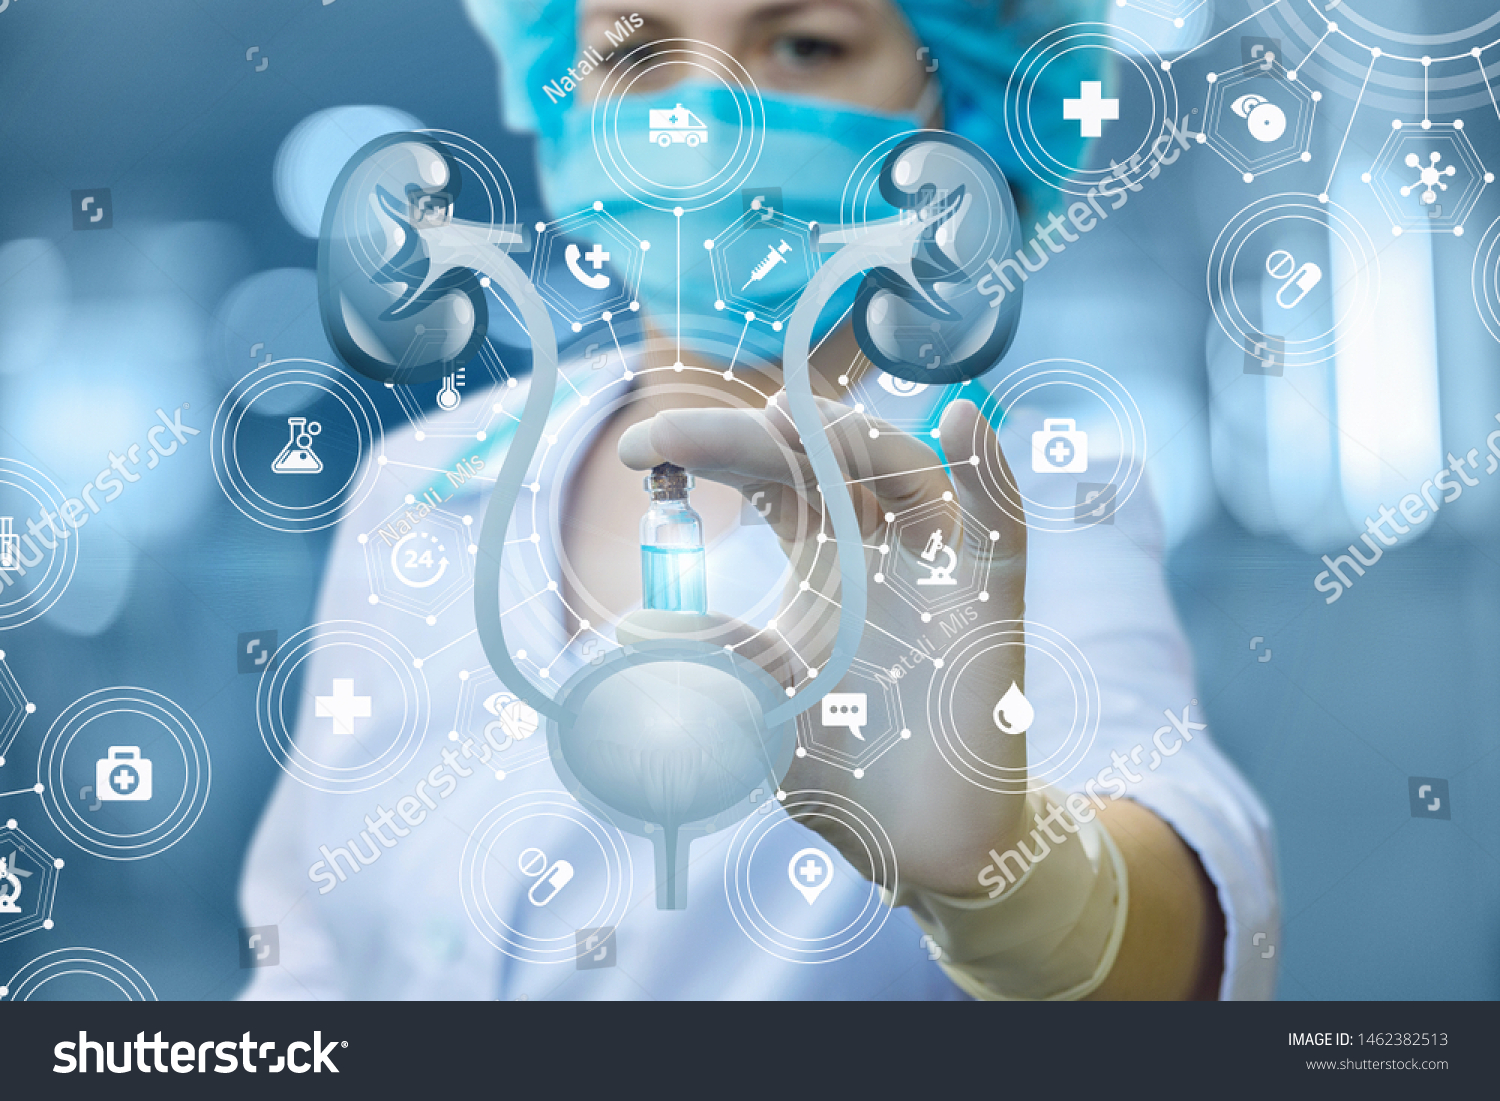 Doctor showing a cure for the treatment of urinary system on blurred background. #1462382513